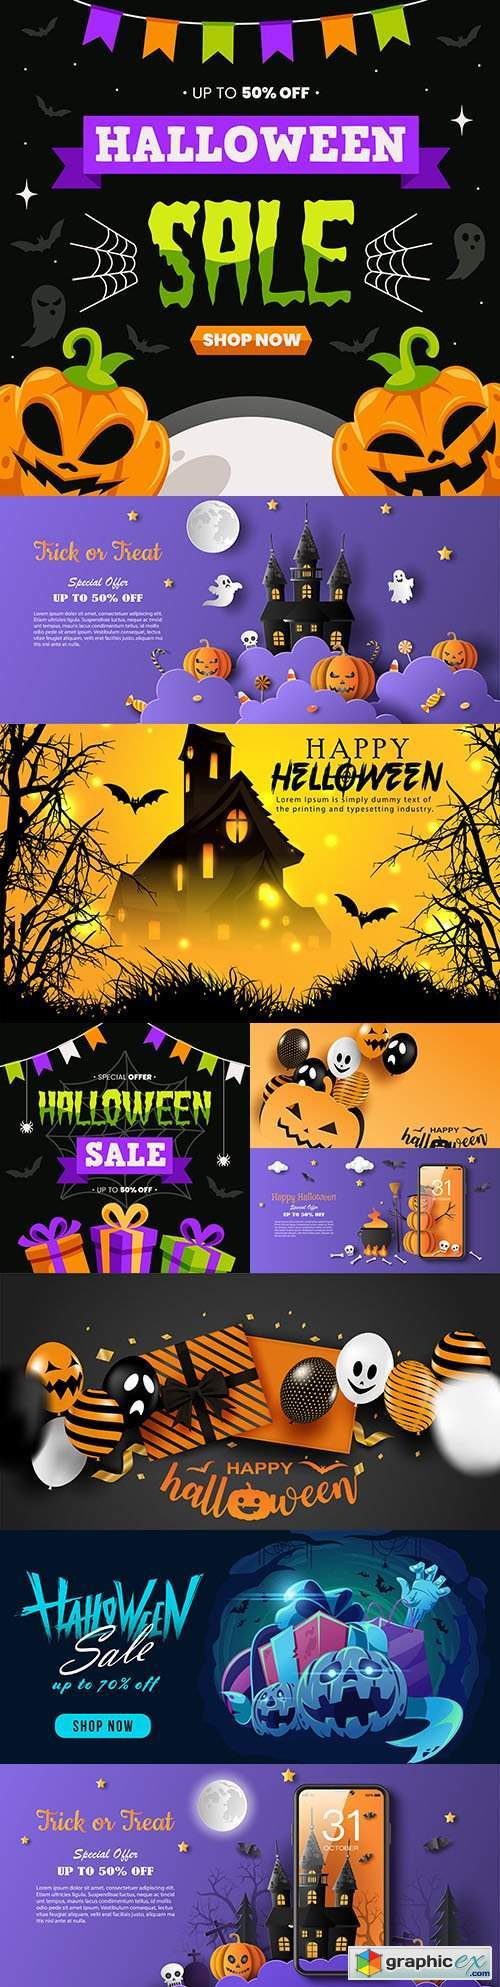 Happy Halloween holiday illustration collection design 10